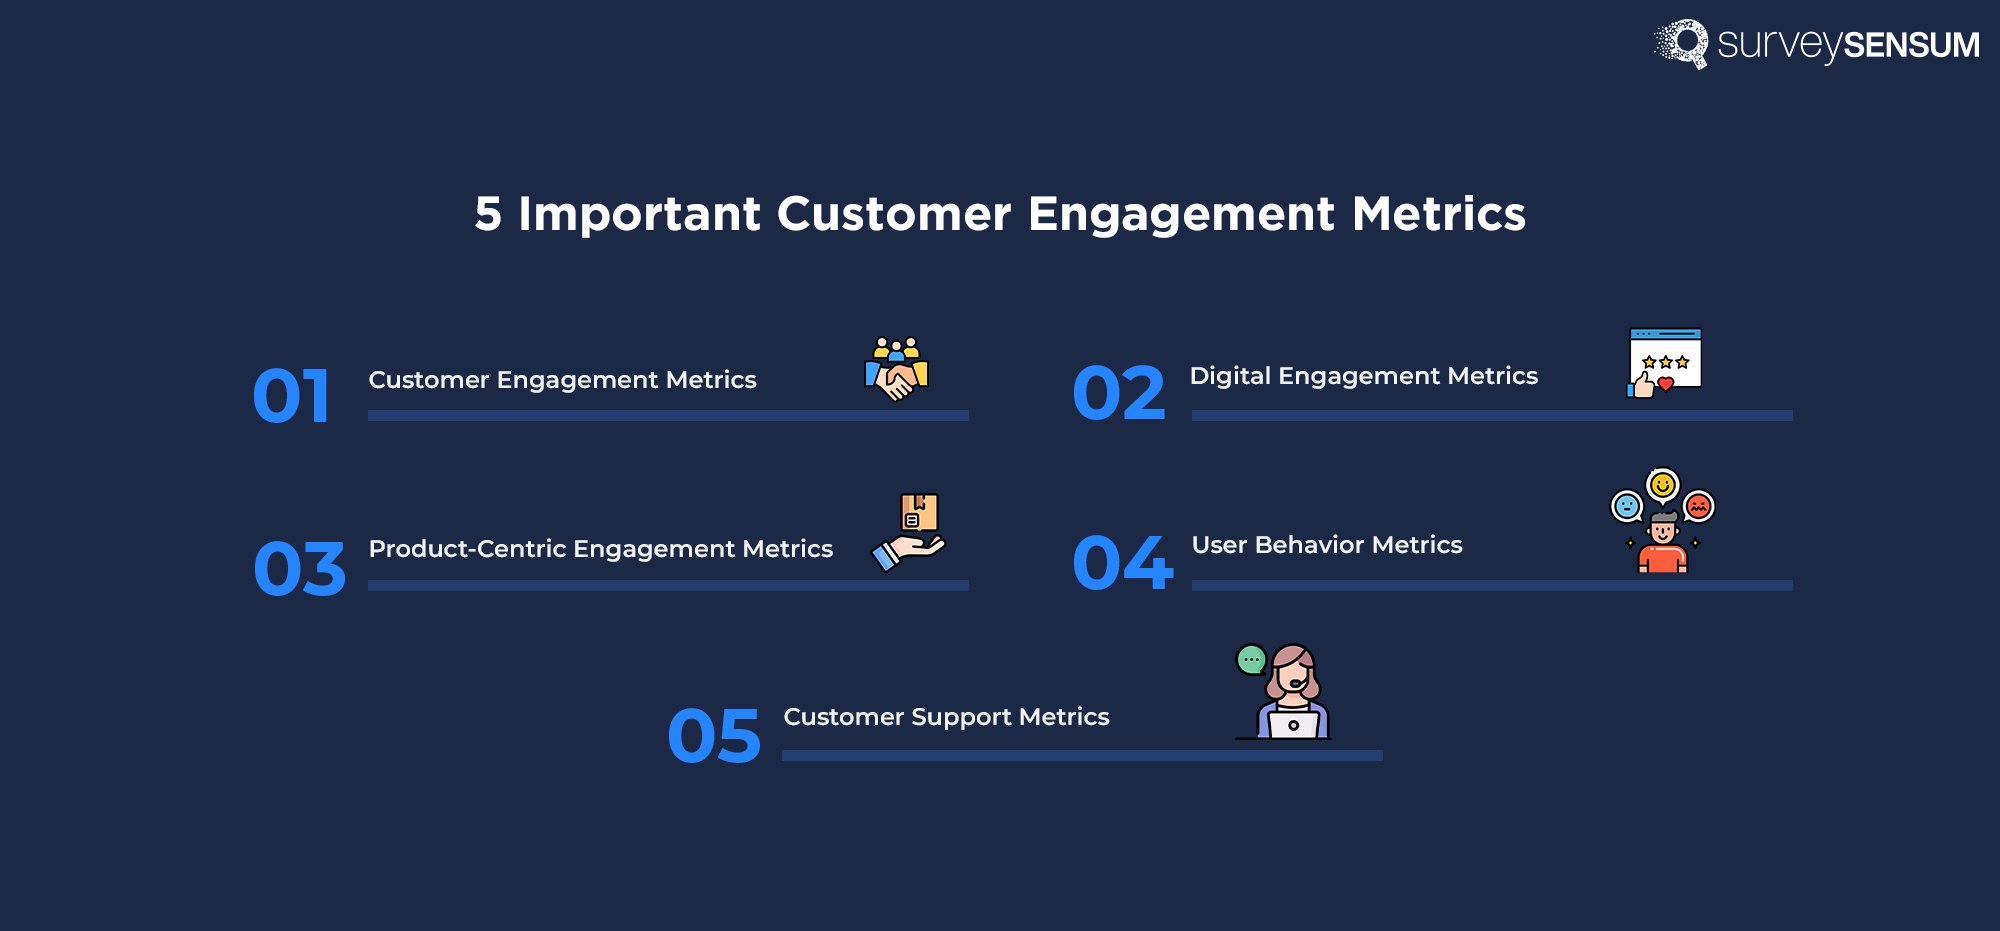 this is a pictorial representation of the 5 Important Customer Engagement Metrics - Overall Customer Engagement Metrics, Digital Engagement Metrics, Product-Centric Engagement Metrics, User Behavior Metrics, and Customer Support Metrics